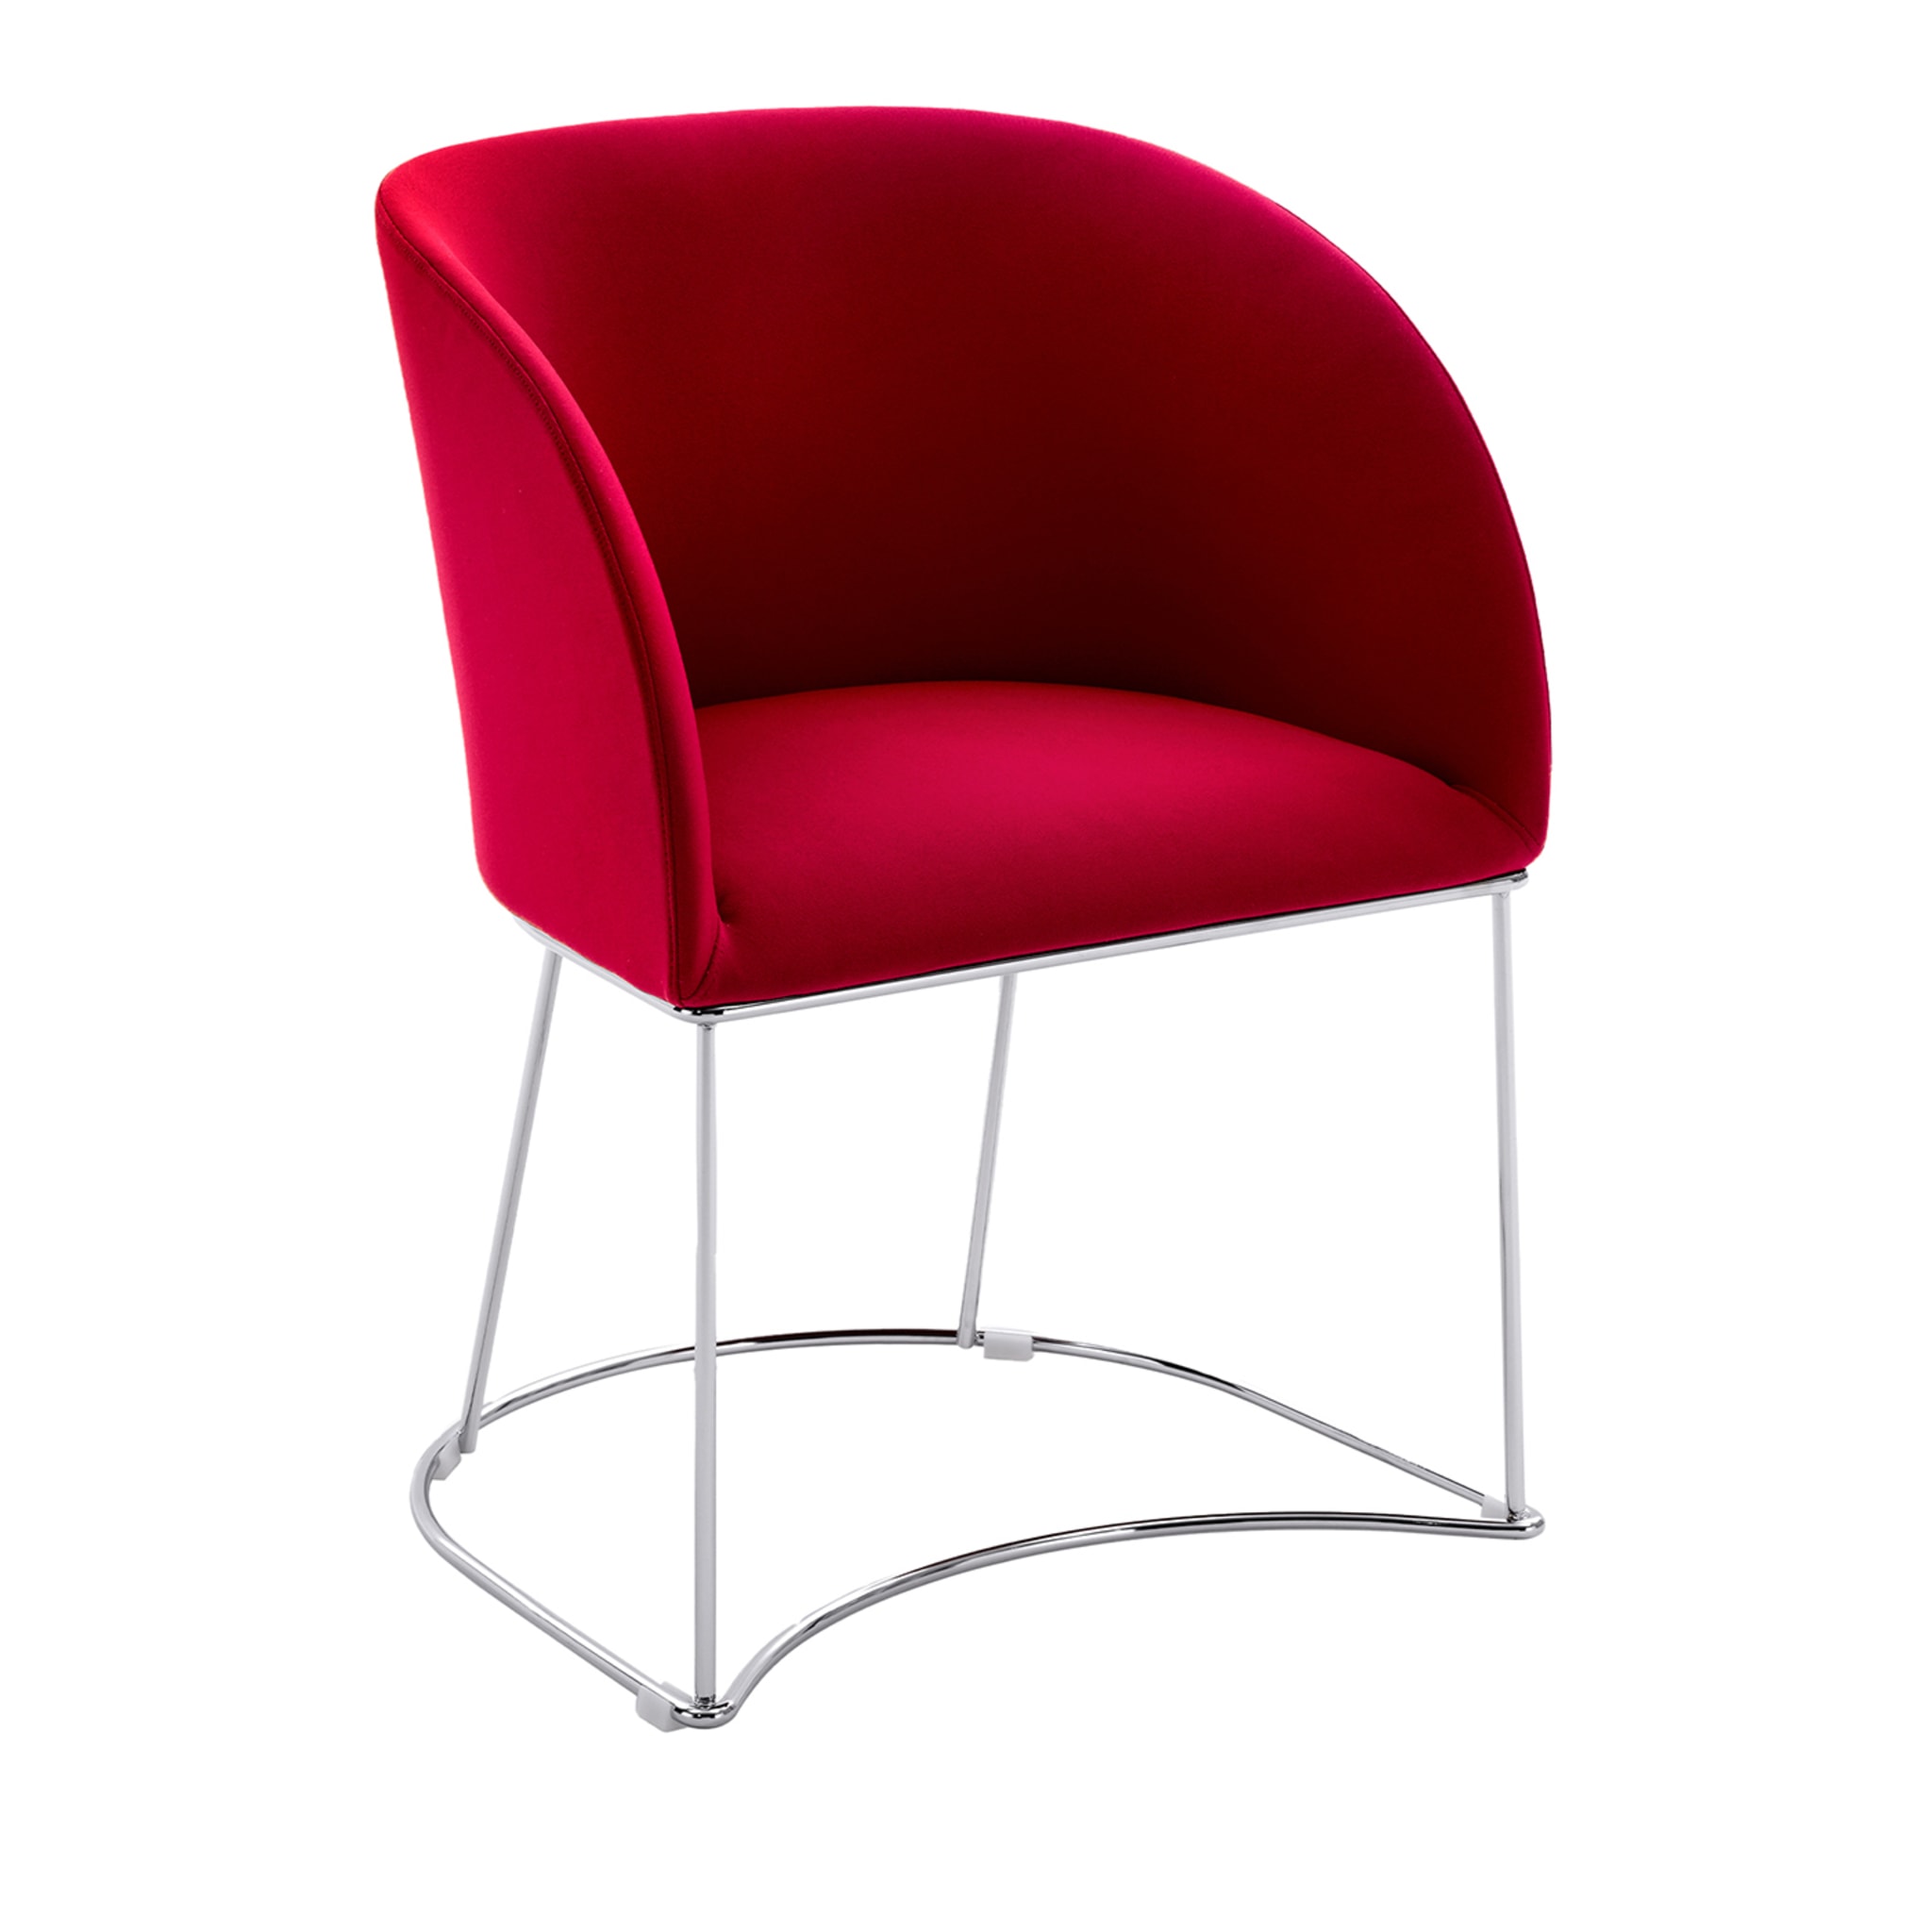 MILLY RED VISITOR CHAIR #2 by Basaglia + Rota Nodari - Main view